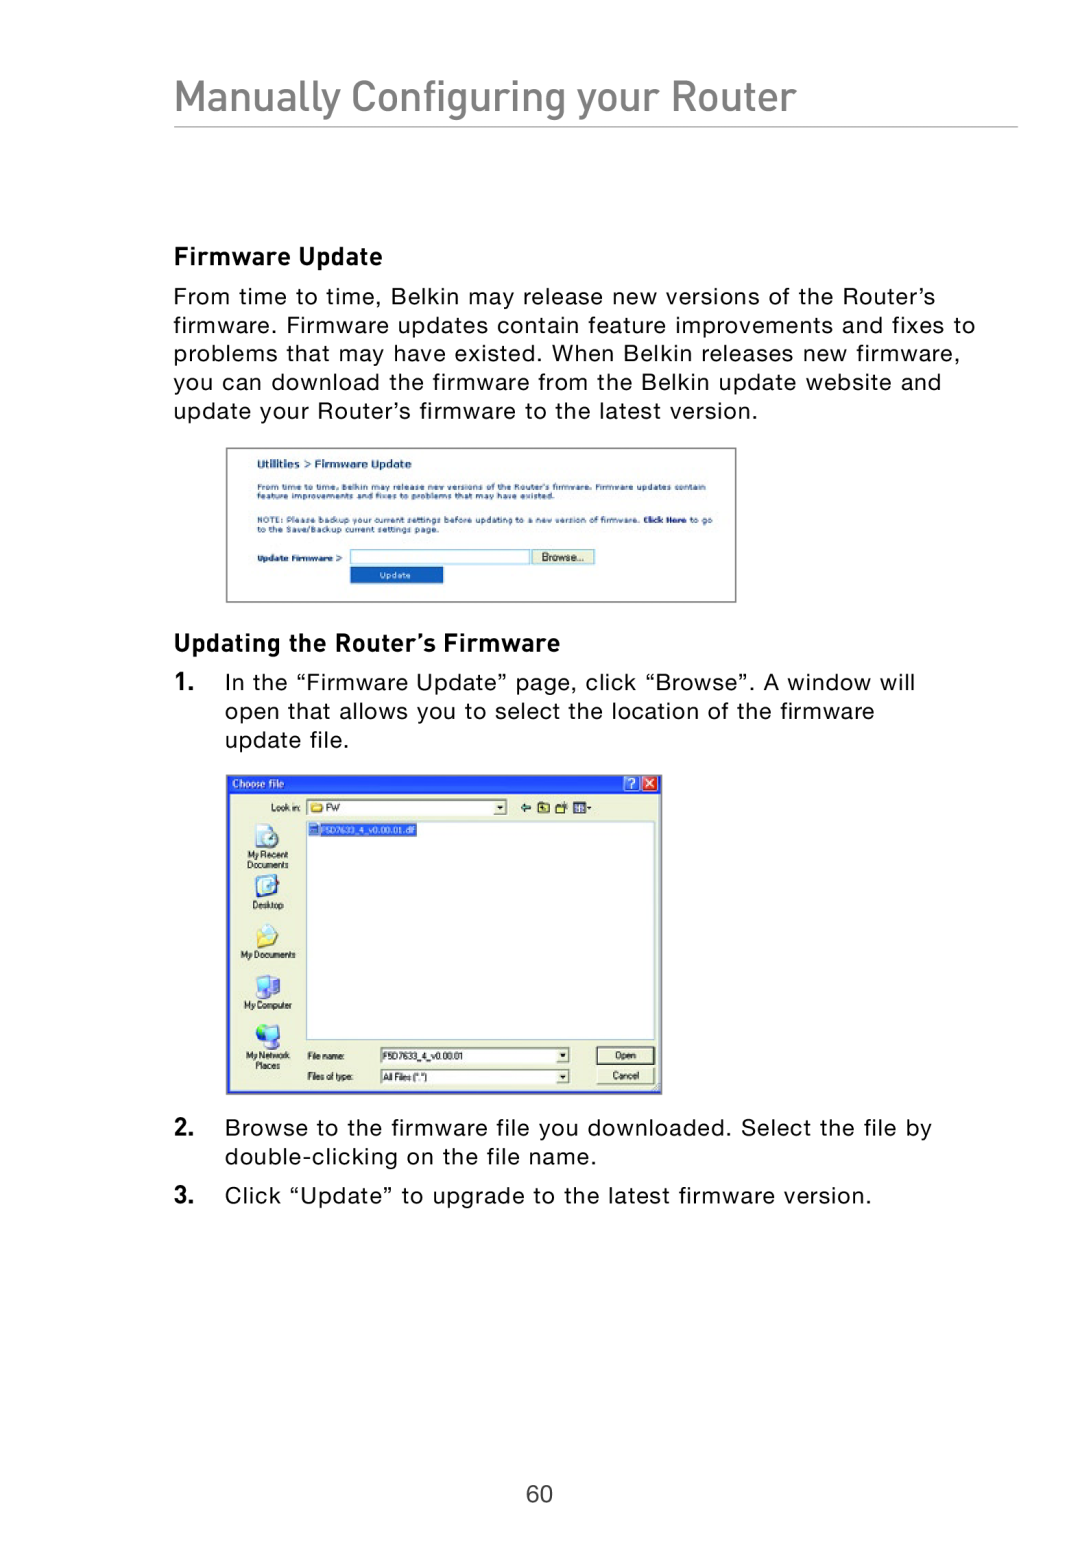 Belkin Pre-N manual Firmware Update, Updating the Router’s Firmware, Manually Configuring your Router 